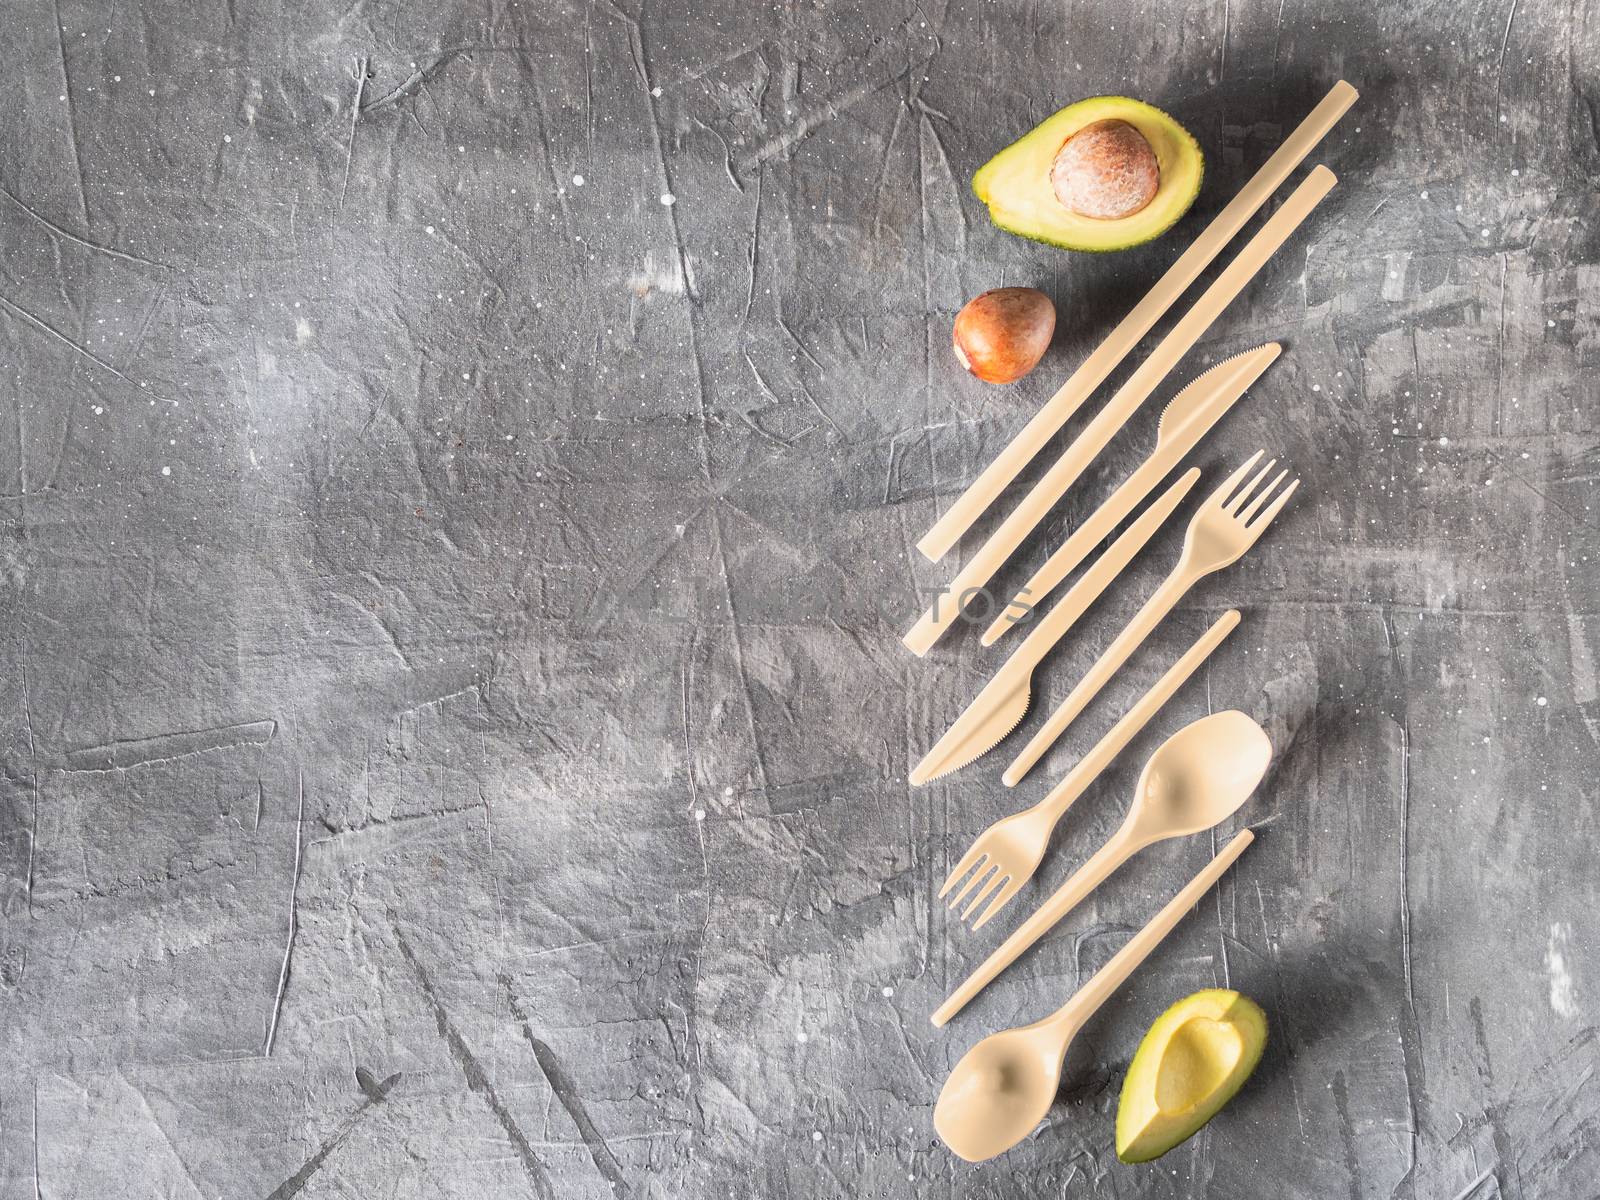 Avocado Seeds Biodegradable Single-Use Cutlery. Bioplastic - Great alternative to plastic disposable cutlery. Top view, flat lay. Gray background